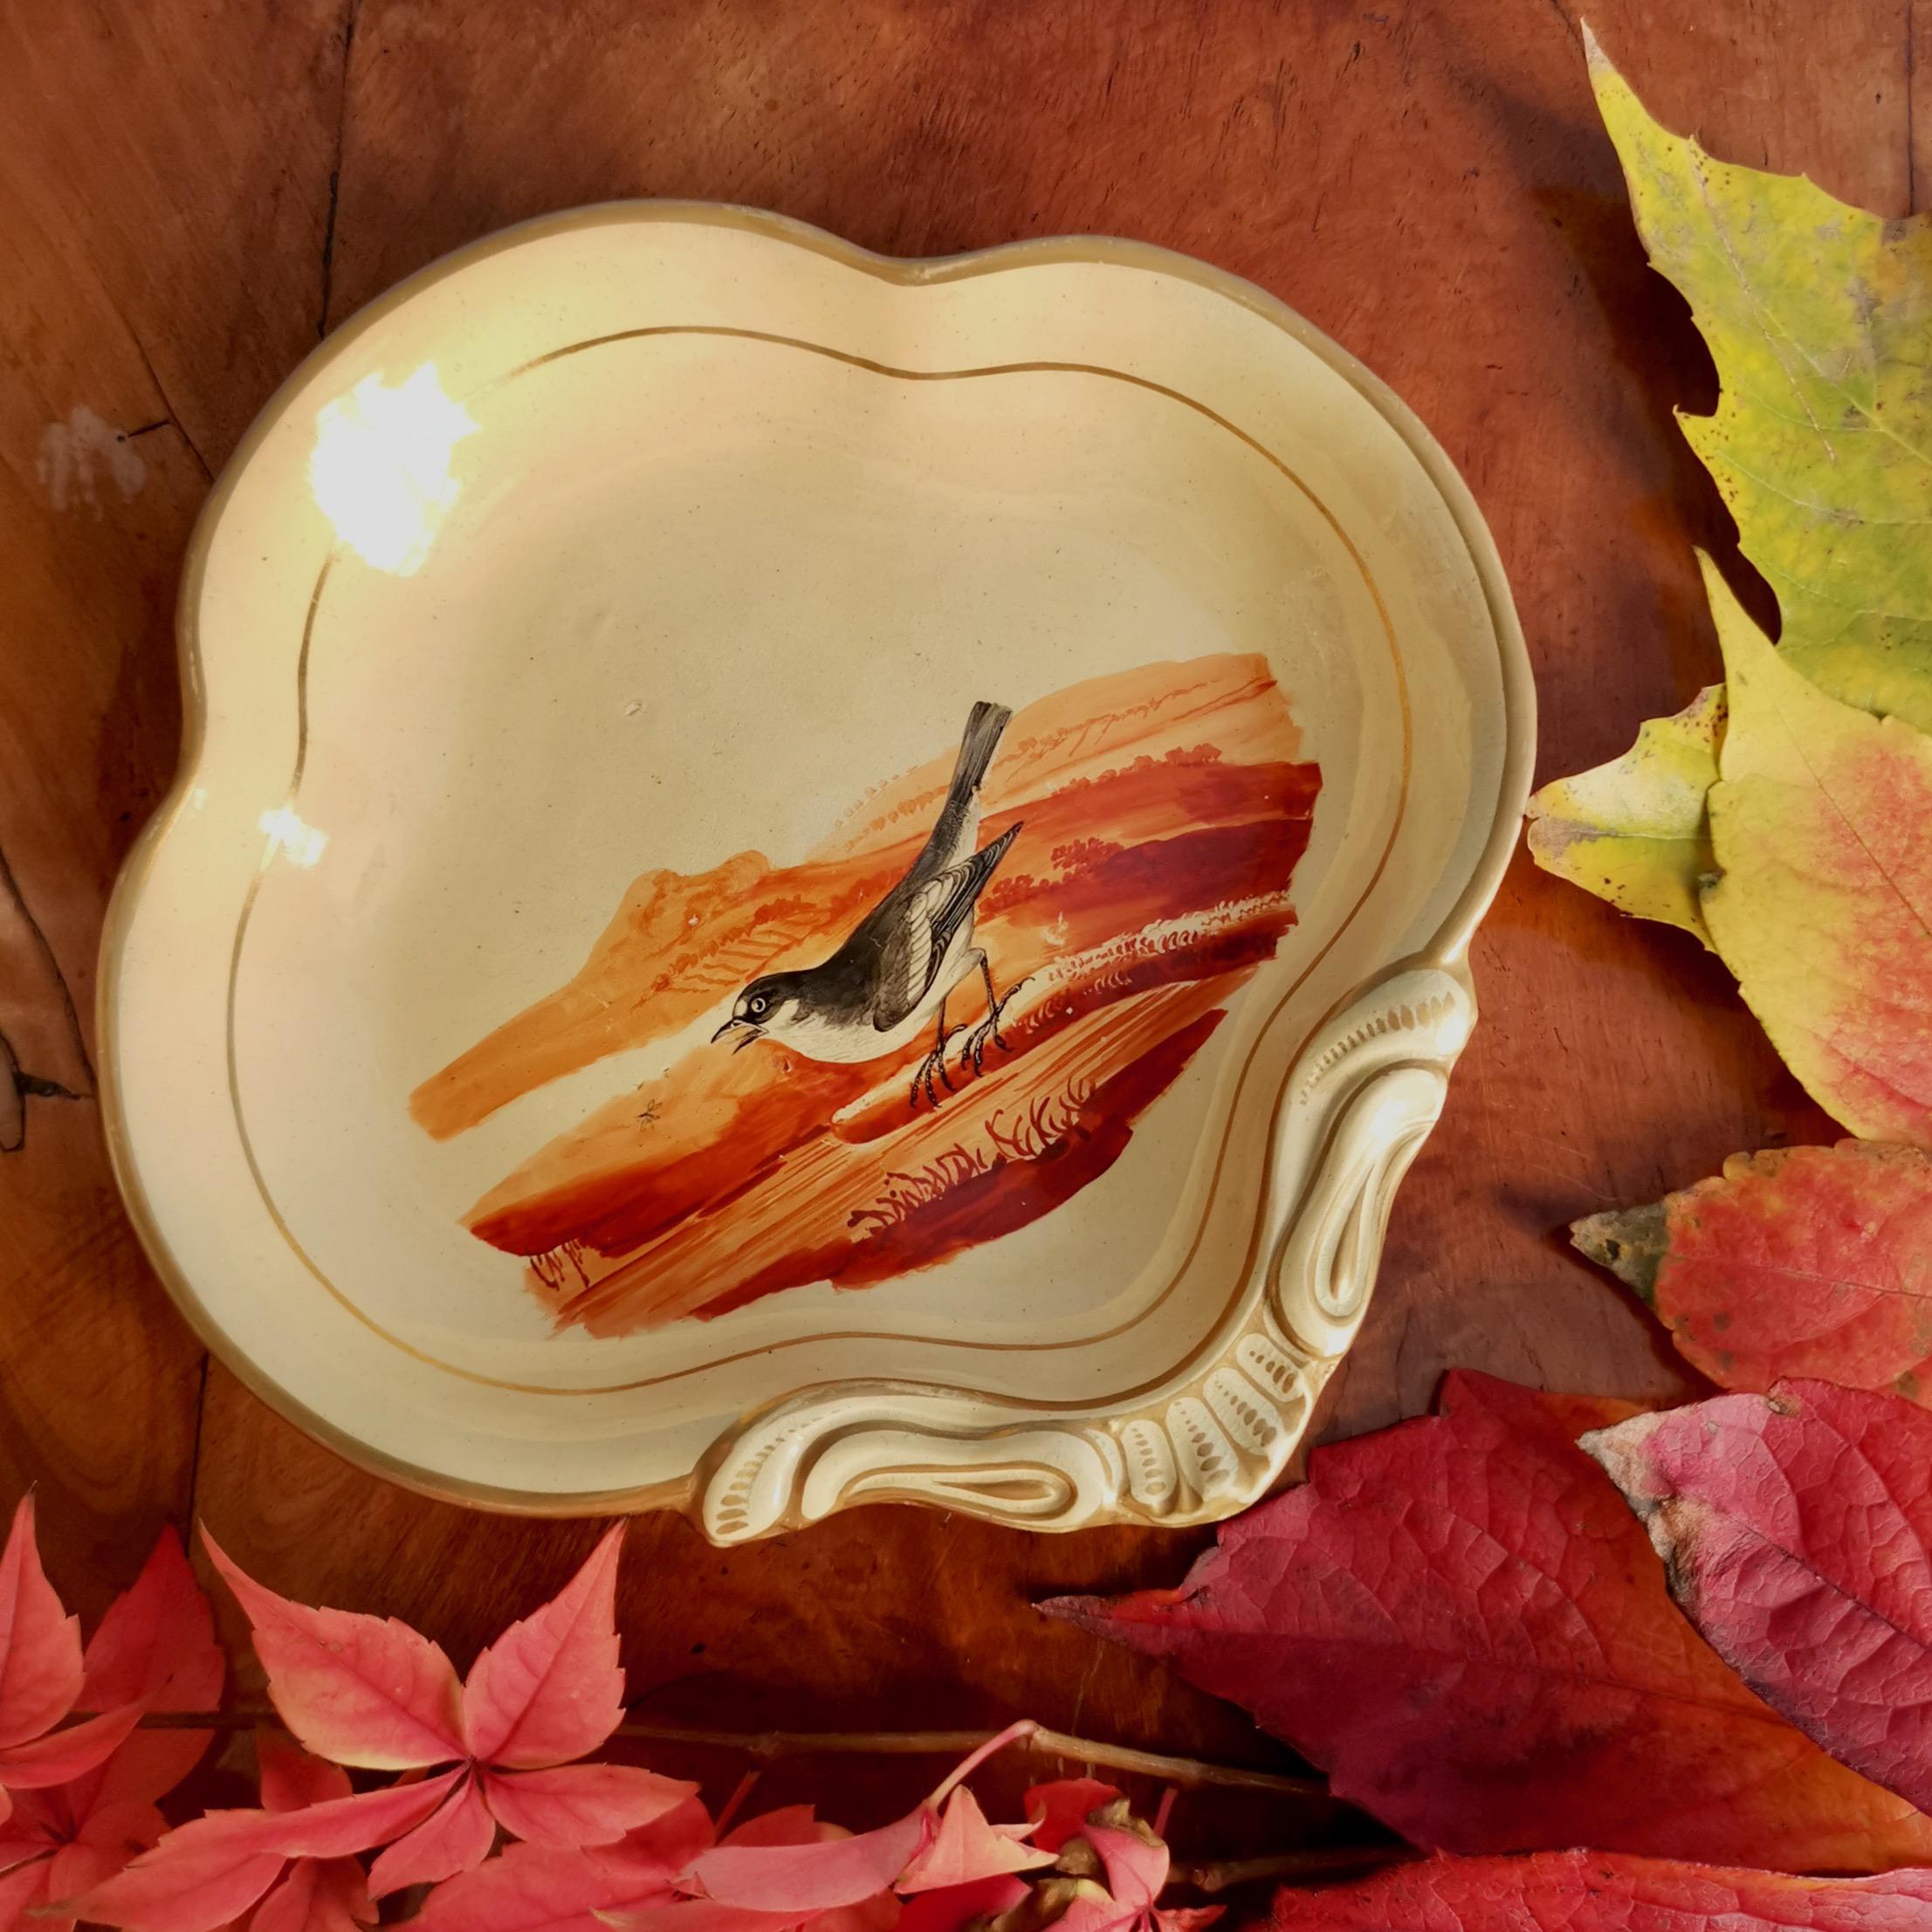 This is a very charming and rare pearlware shell dish made by Wedgwood in circa 1820. The dish has a beautiful beige ground and is painted with a bird in iron red.

Wedgwood is one of the original great potteries of Staffordshire in England. While